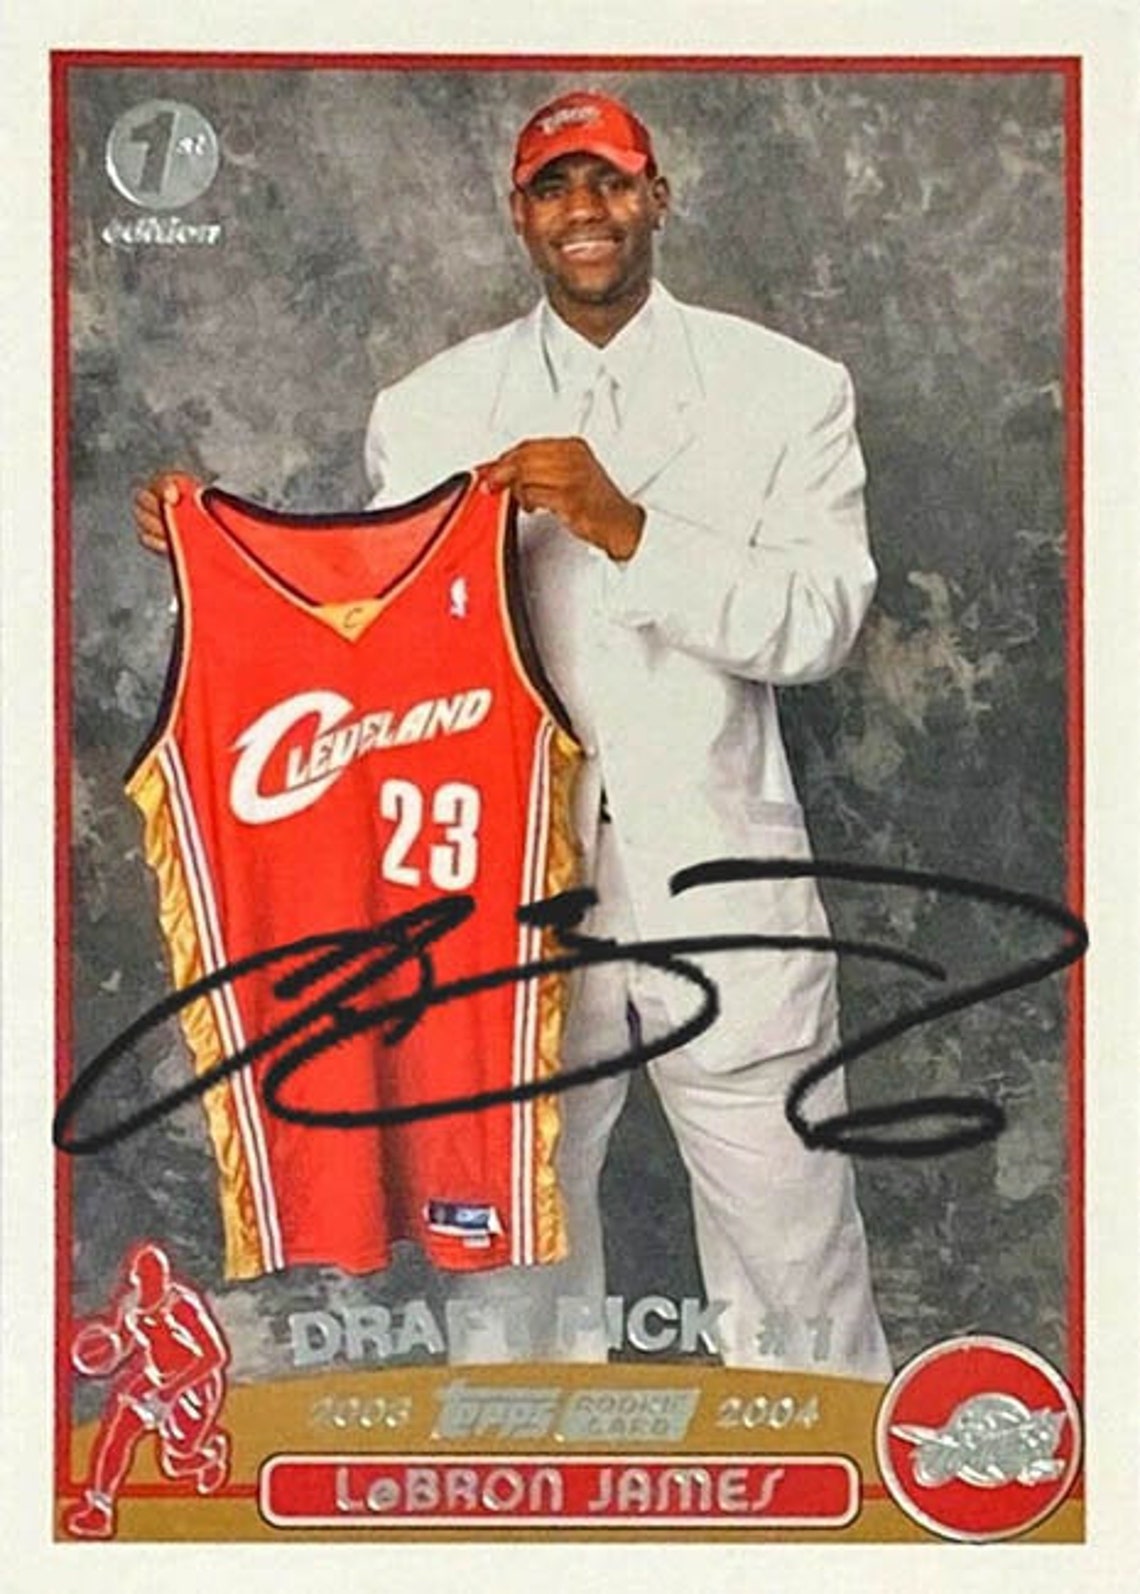 Lebron James AUTOGRAPH Any Card Front or Back of Card Any Card | Etsy